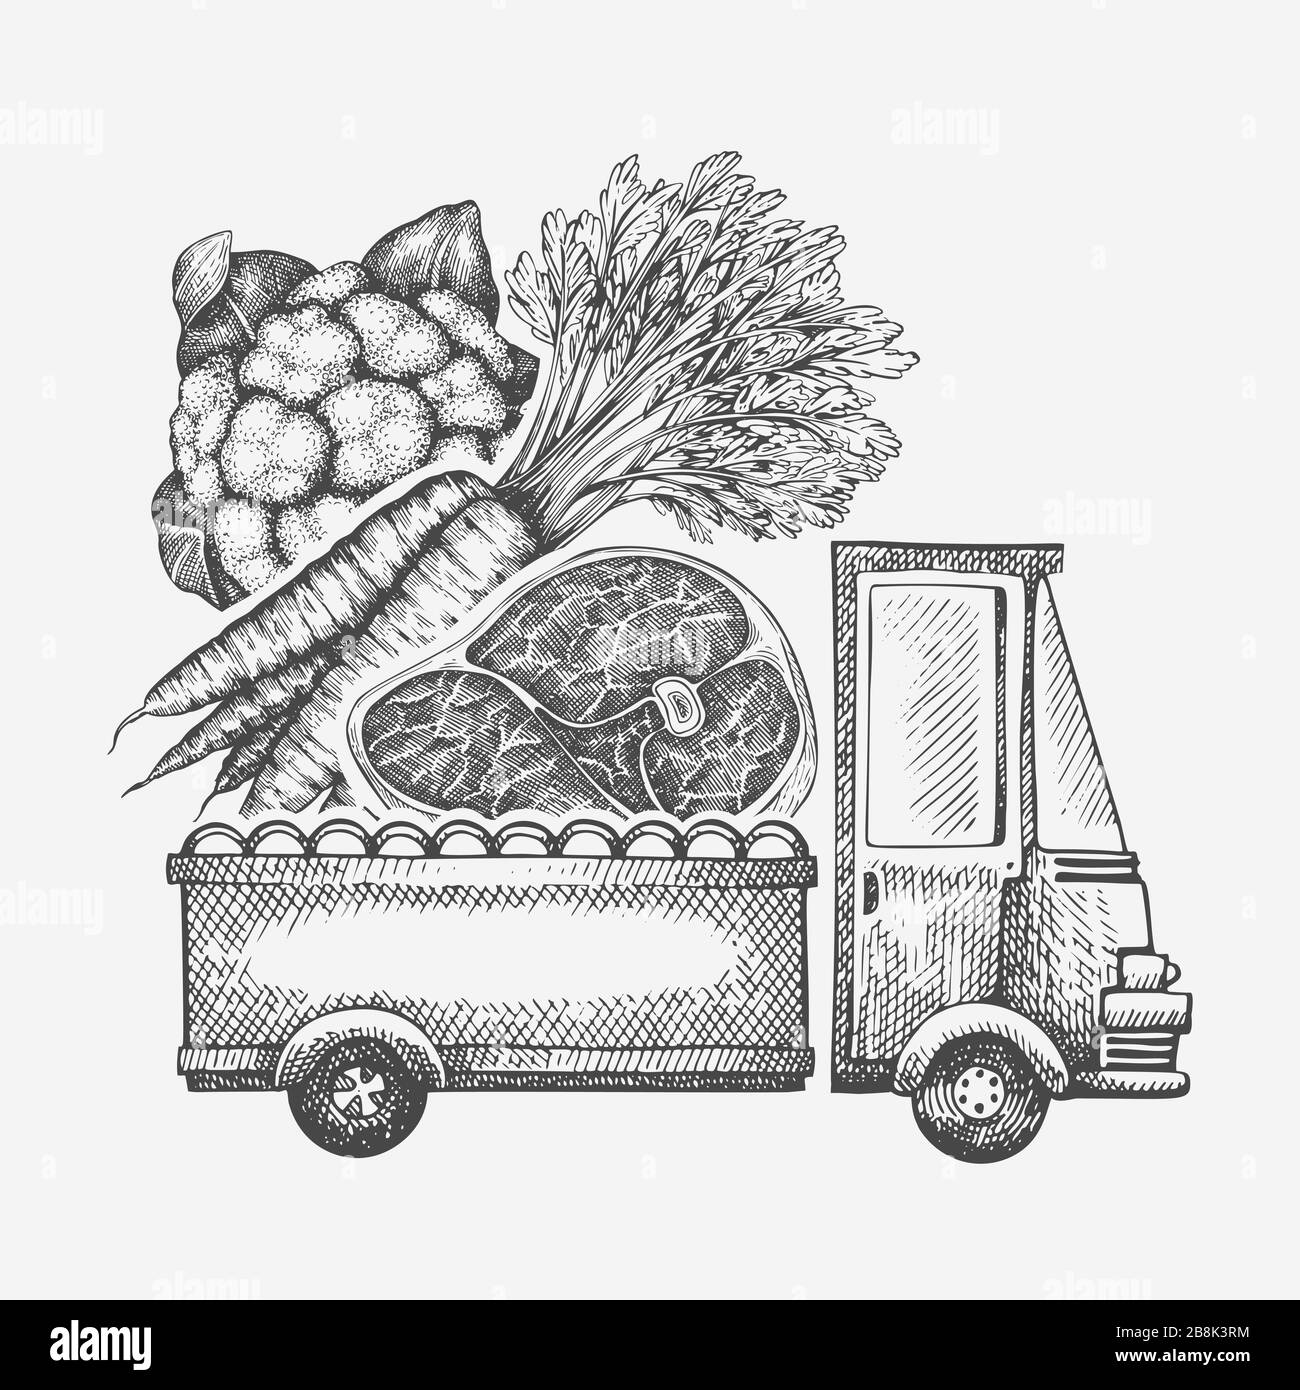 Food shop delivery logo template. Hand drawn vector truck with vegetables and meat illustration. Engraved style vintage food design. Stock Vector